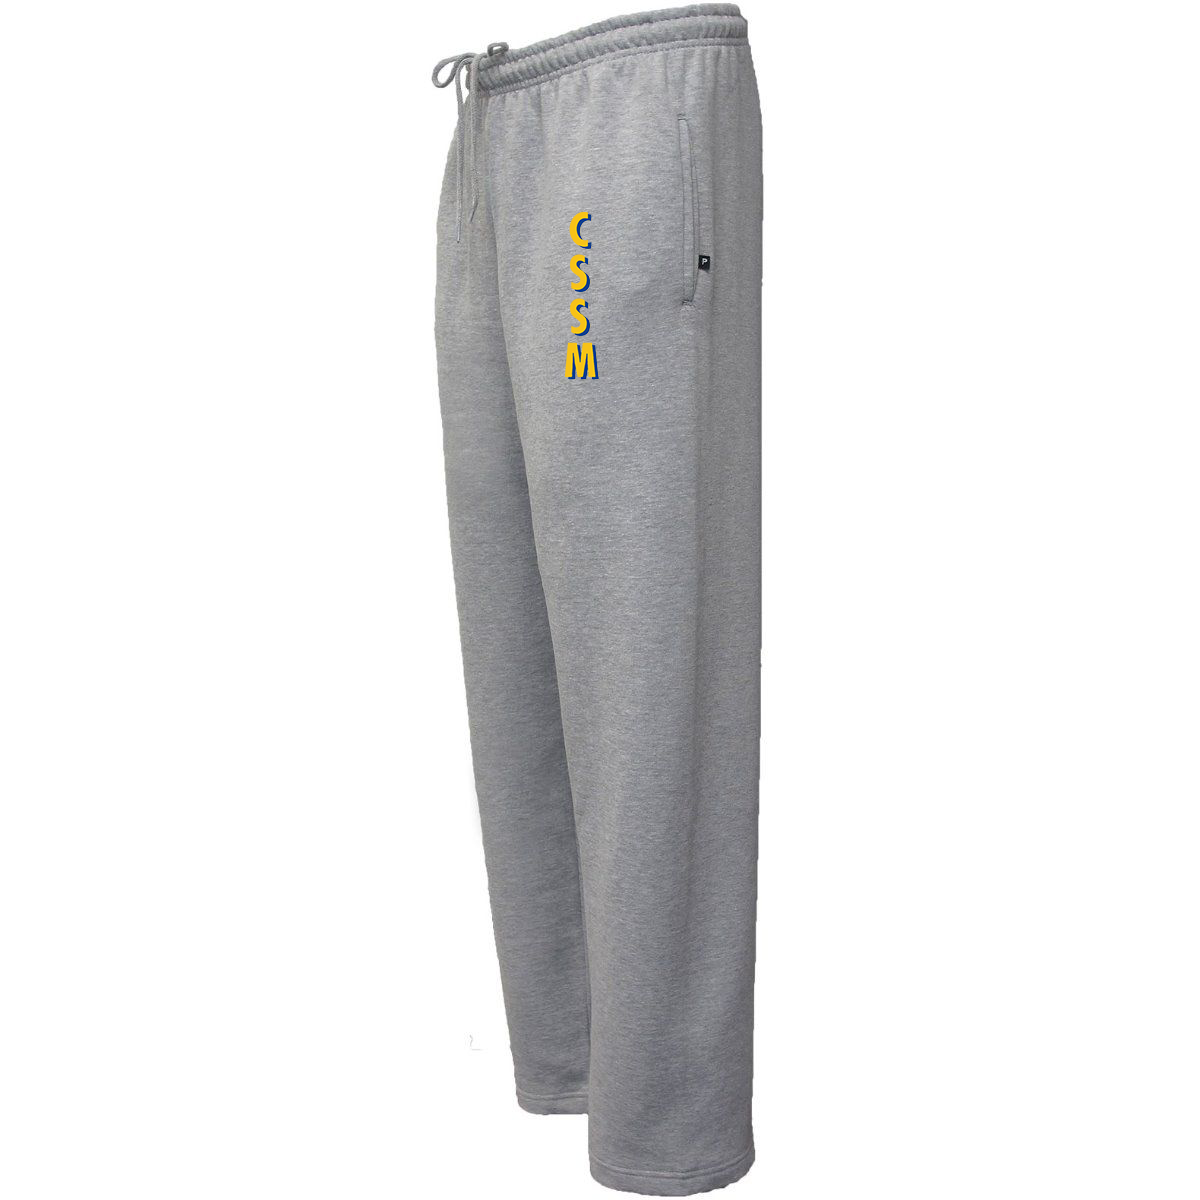 Cleveland School of Science and Medicine Sweatpants